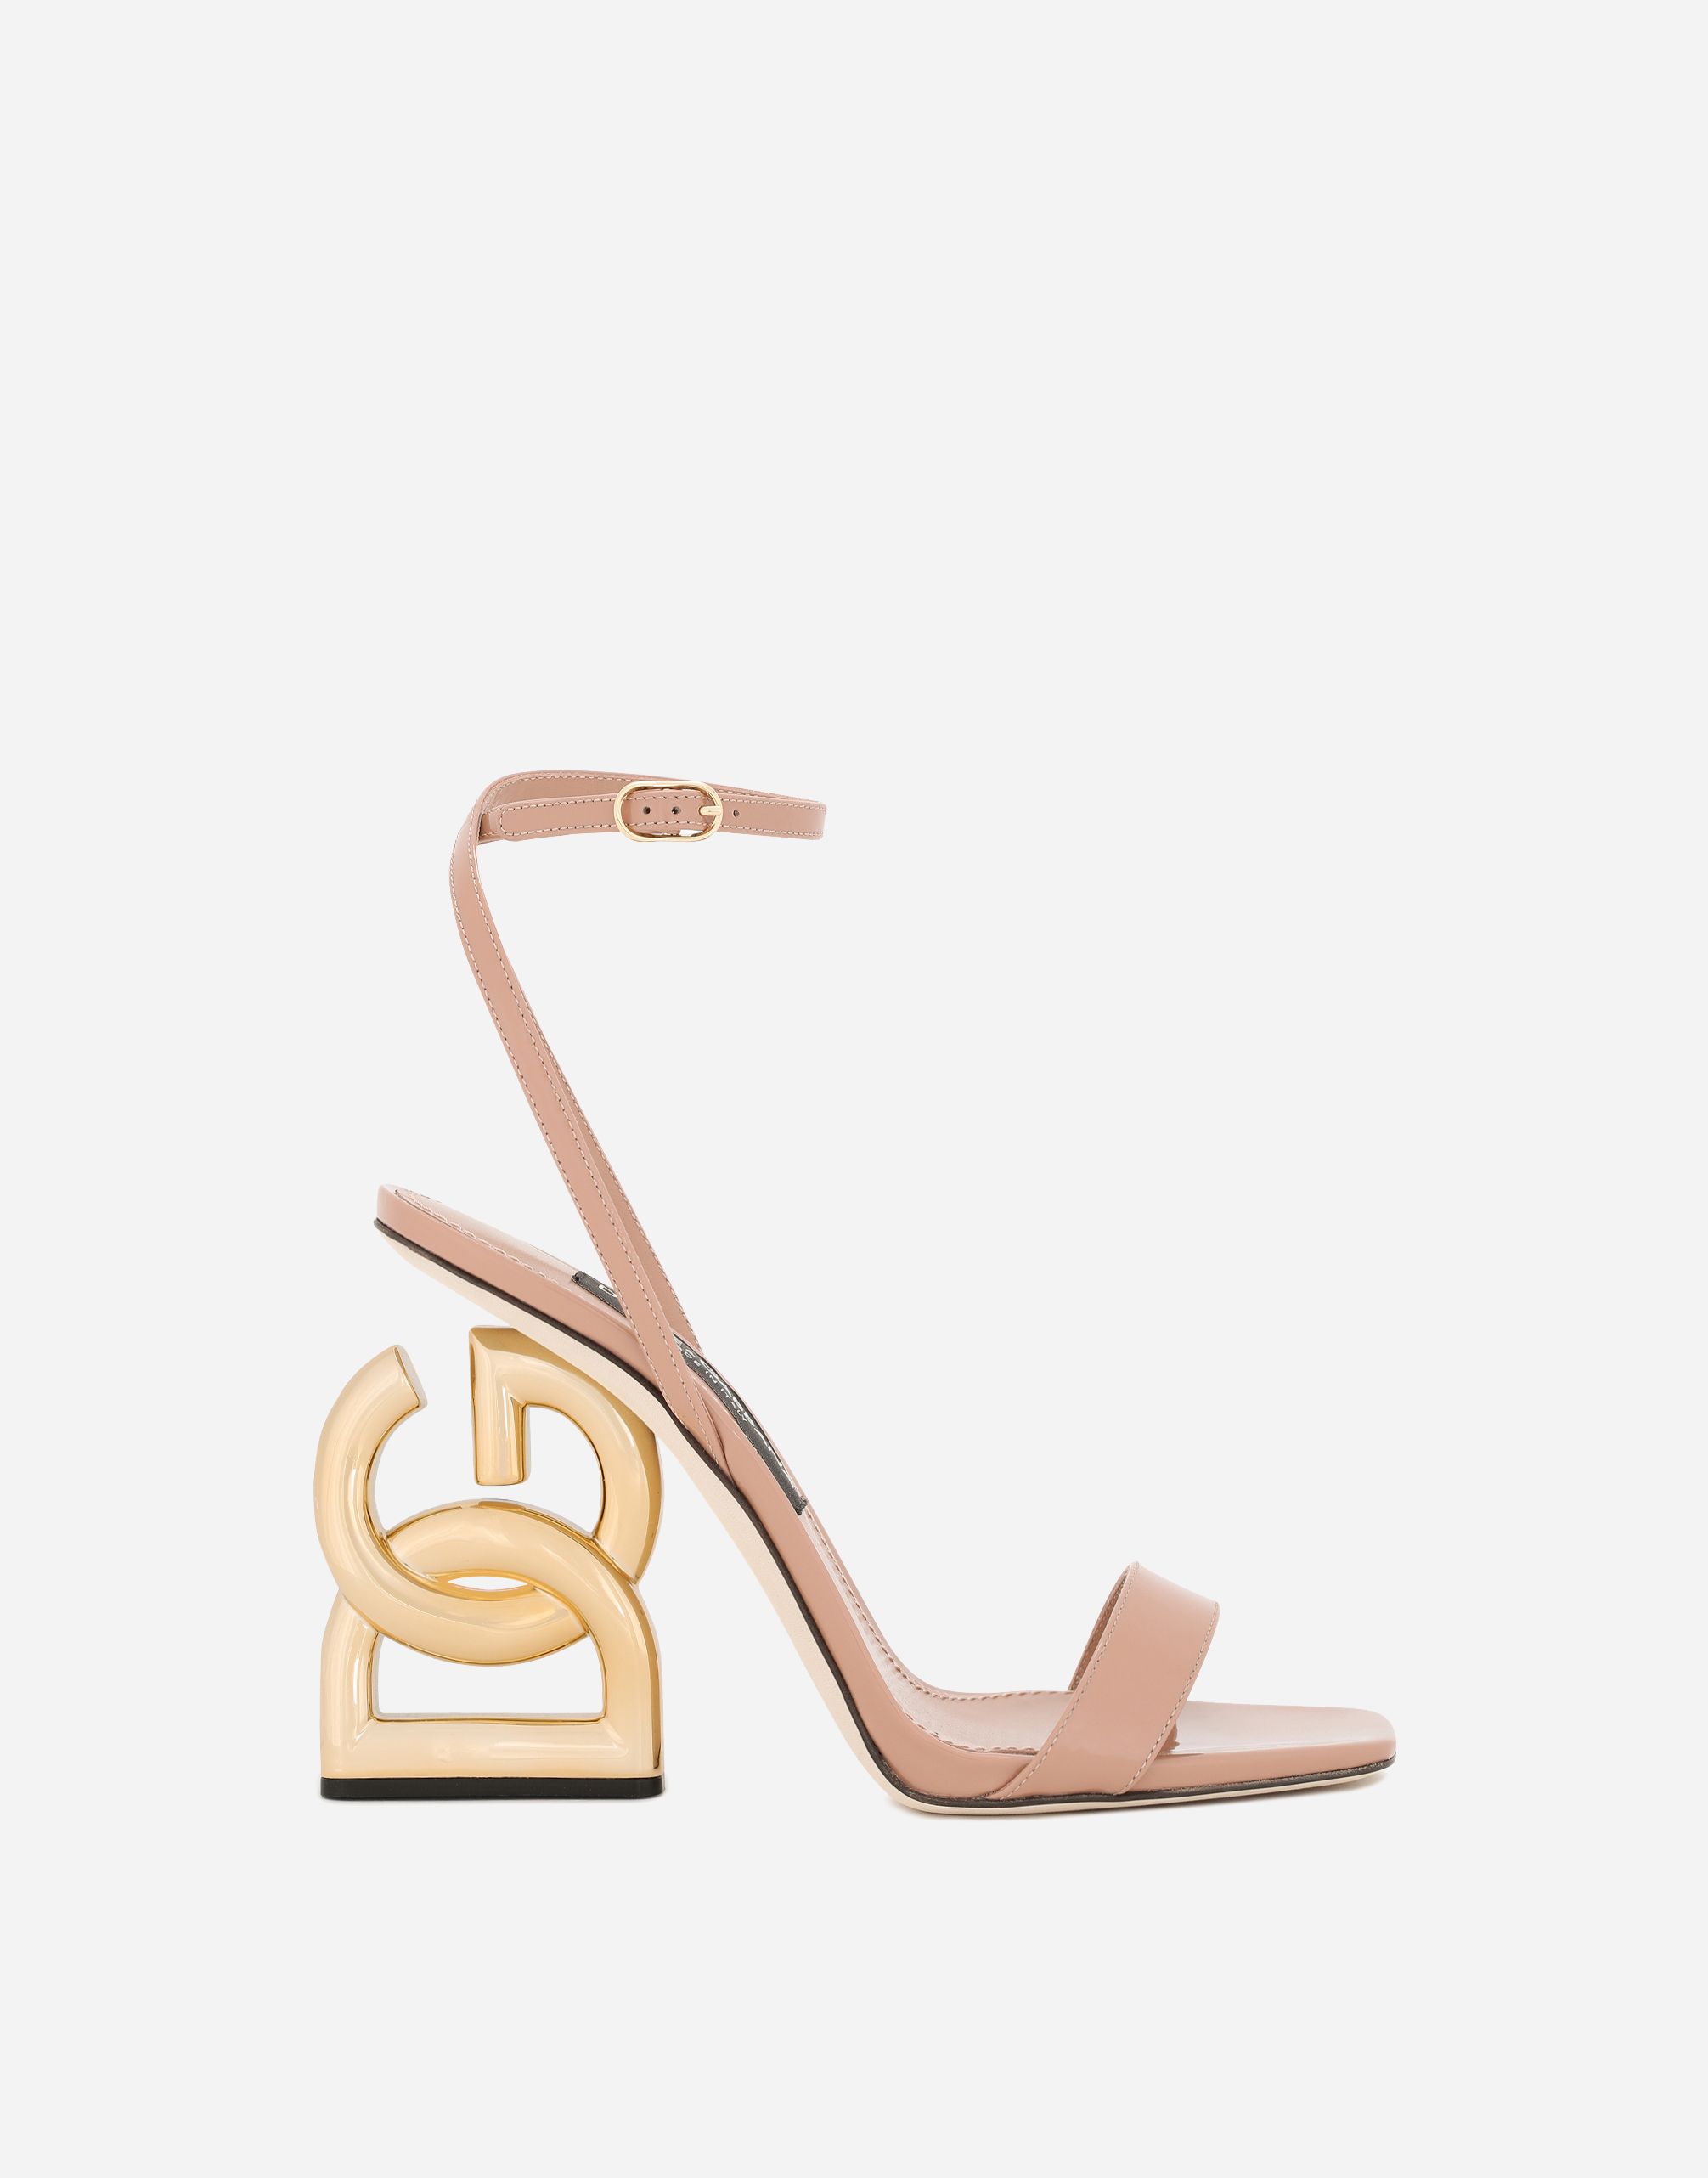 Patent leather sandals with 3.5 heel | Dolce & Gabbana